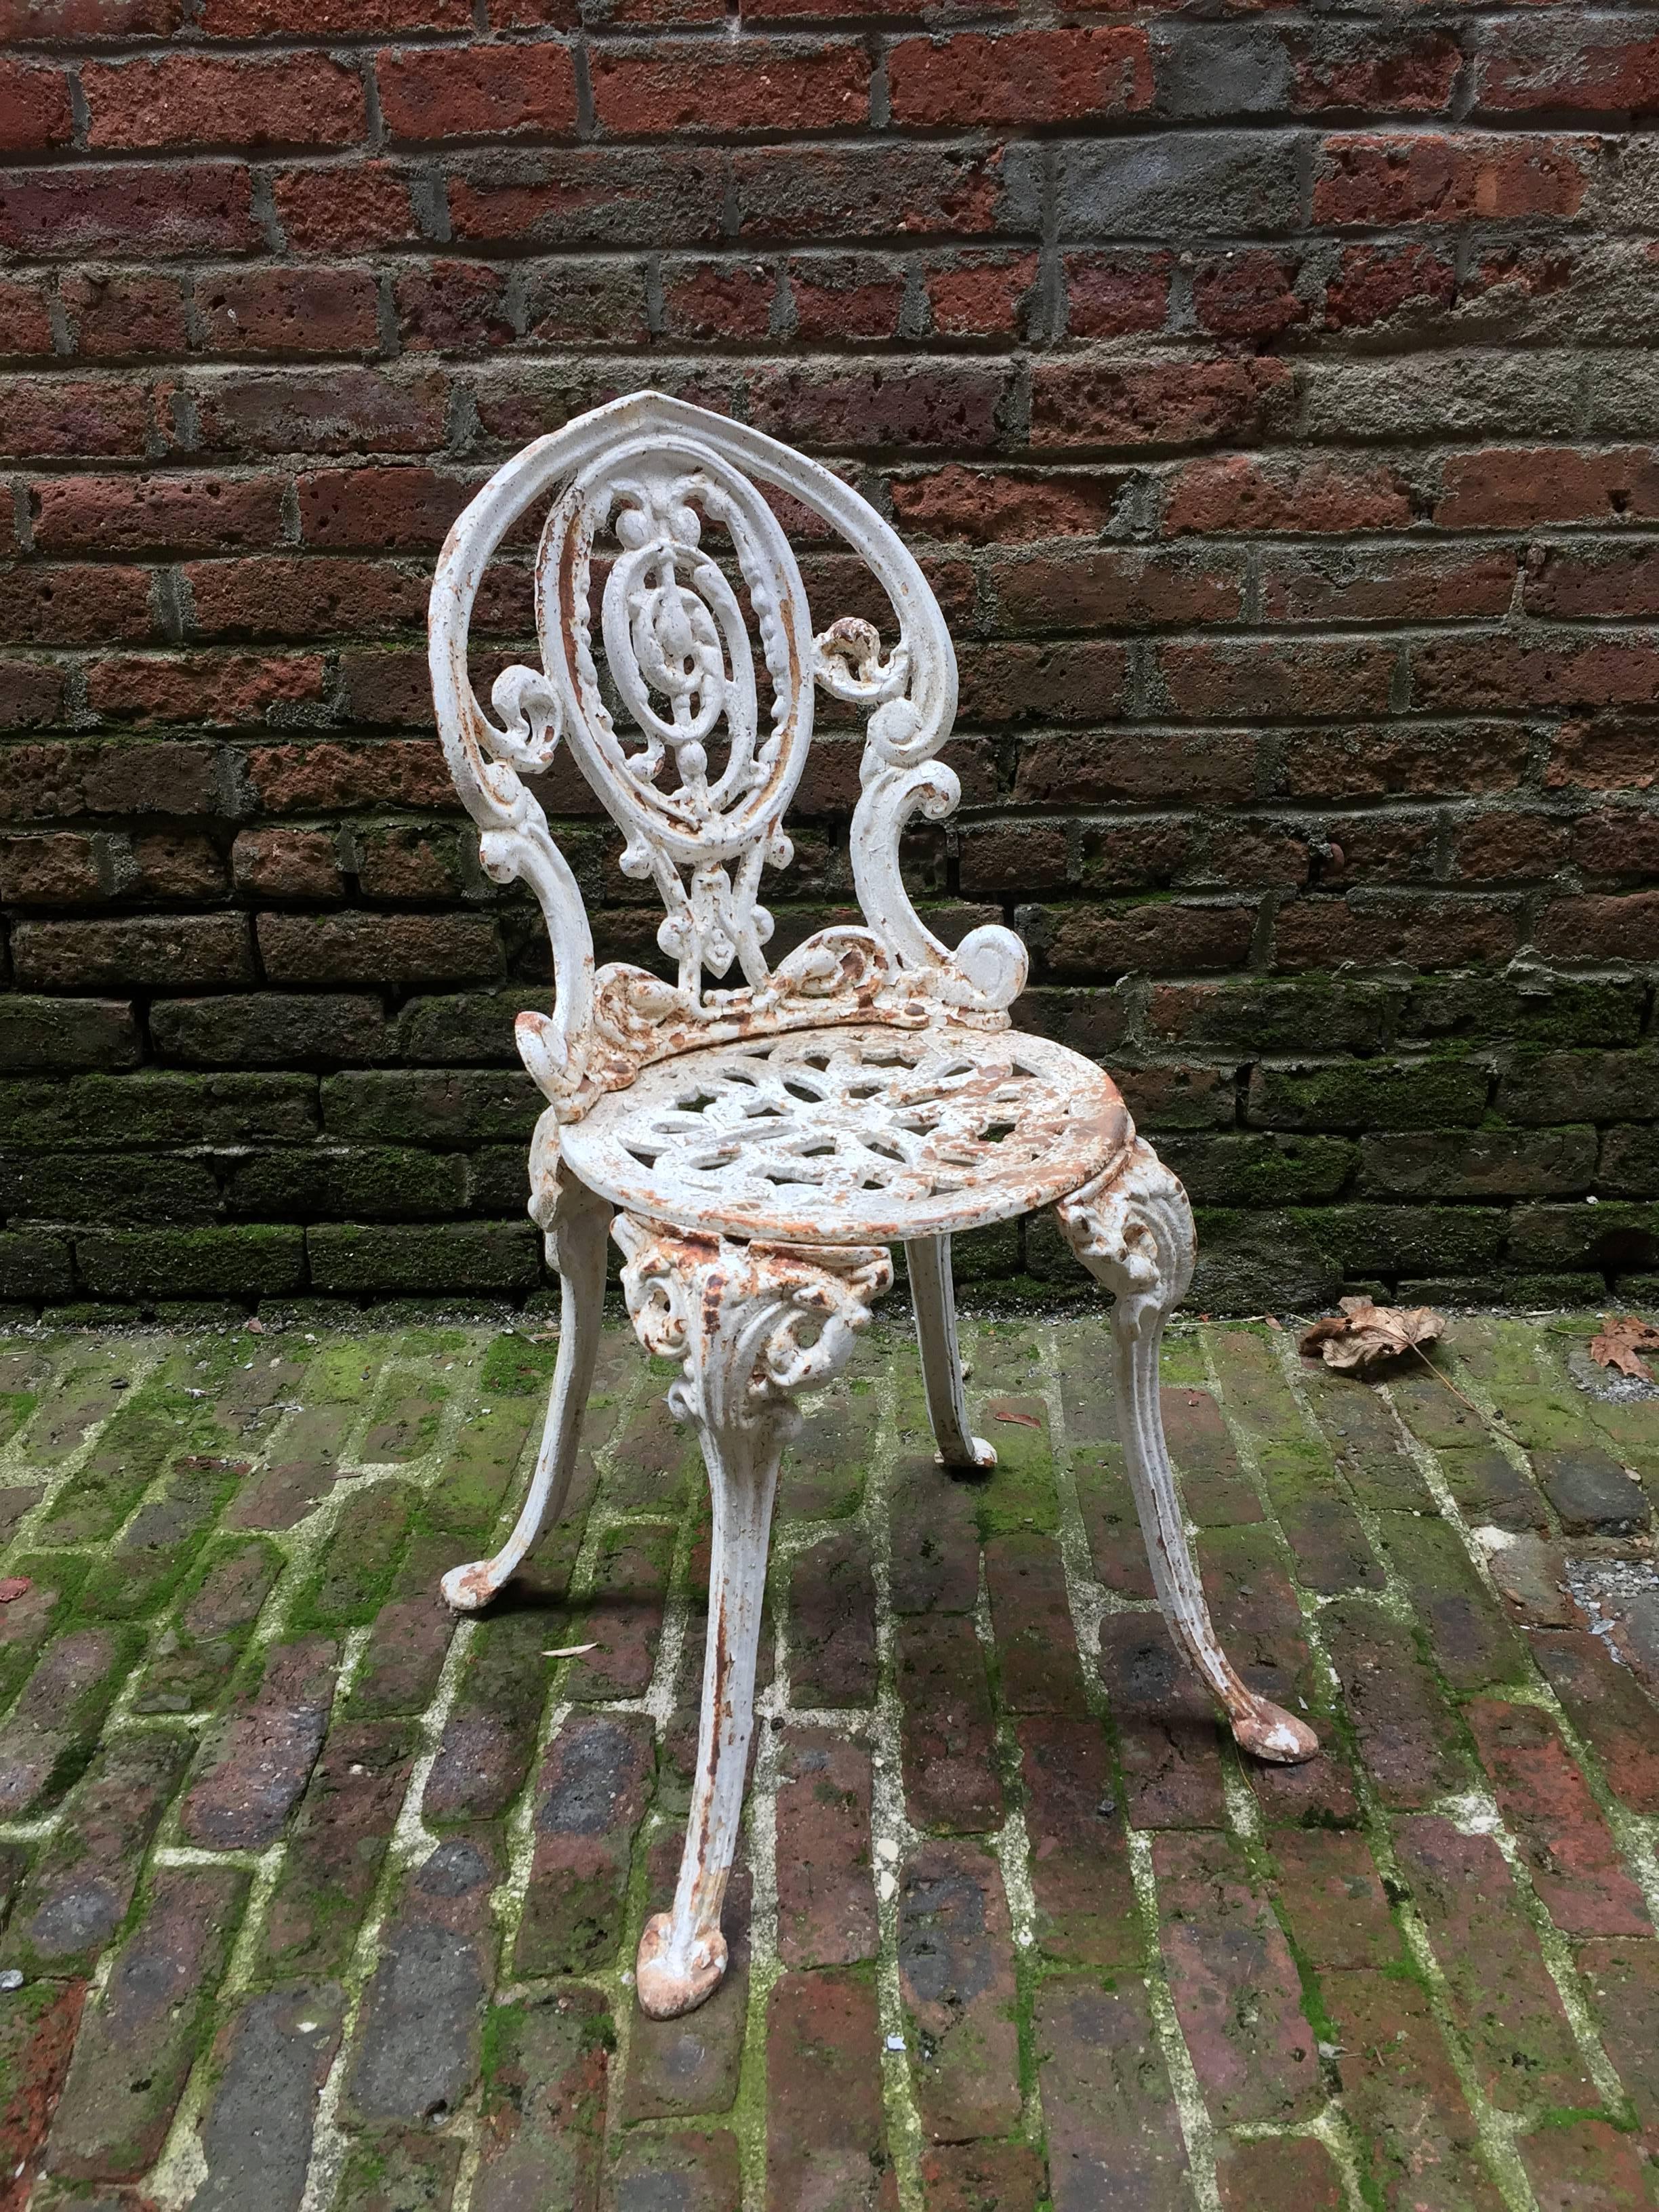 Sumptuous and intricate Victorian cast iron outdoor chair. Heavy cast iron, circa 1900. A wonderful accent chair

Seat height is 15.5